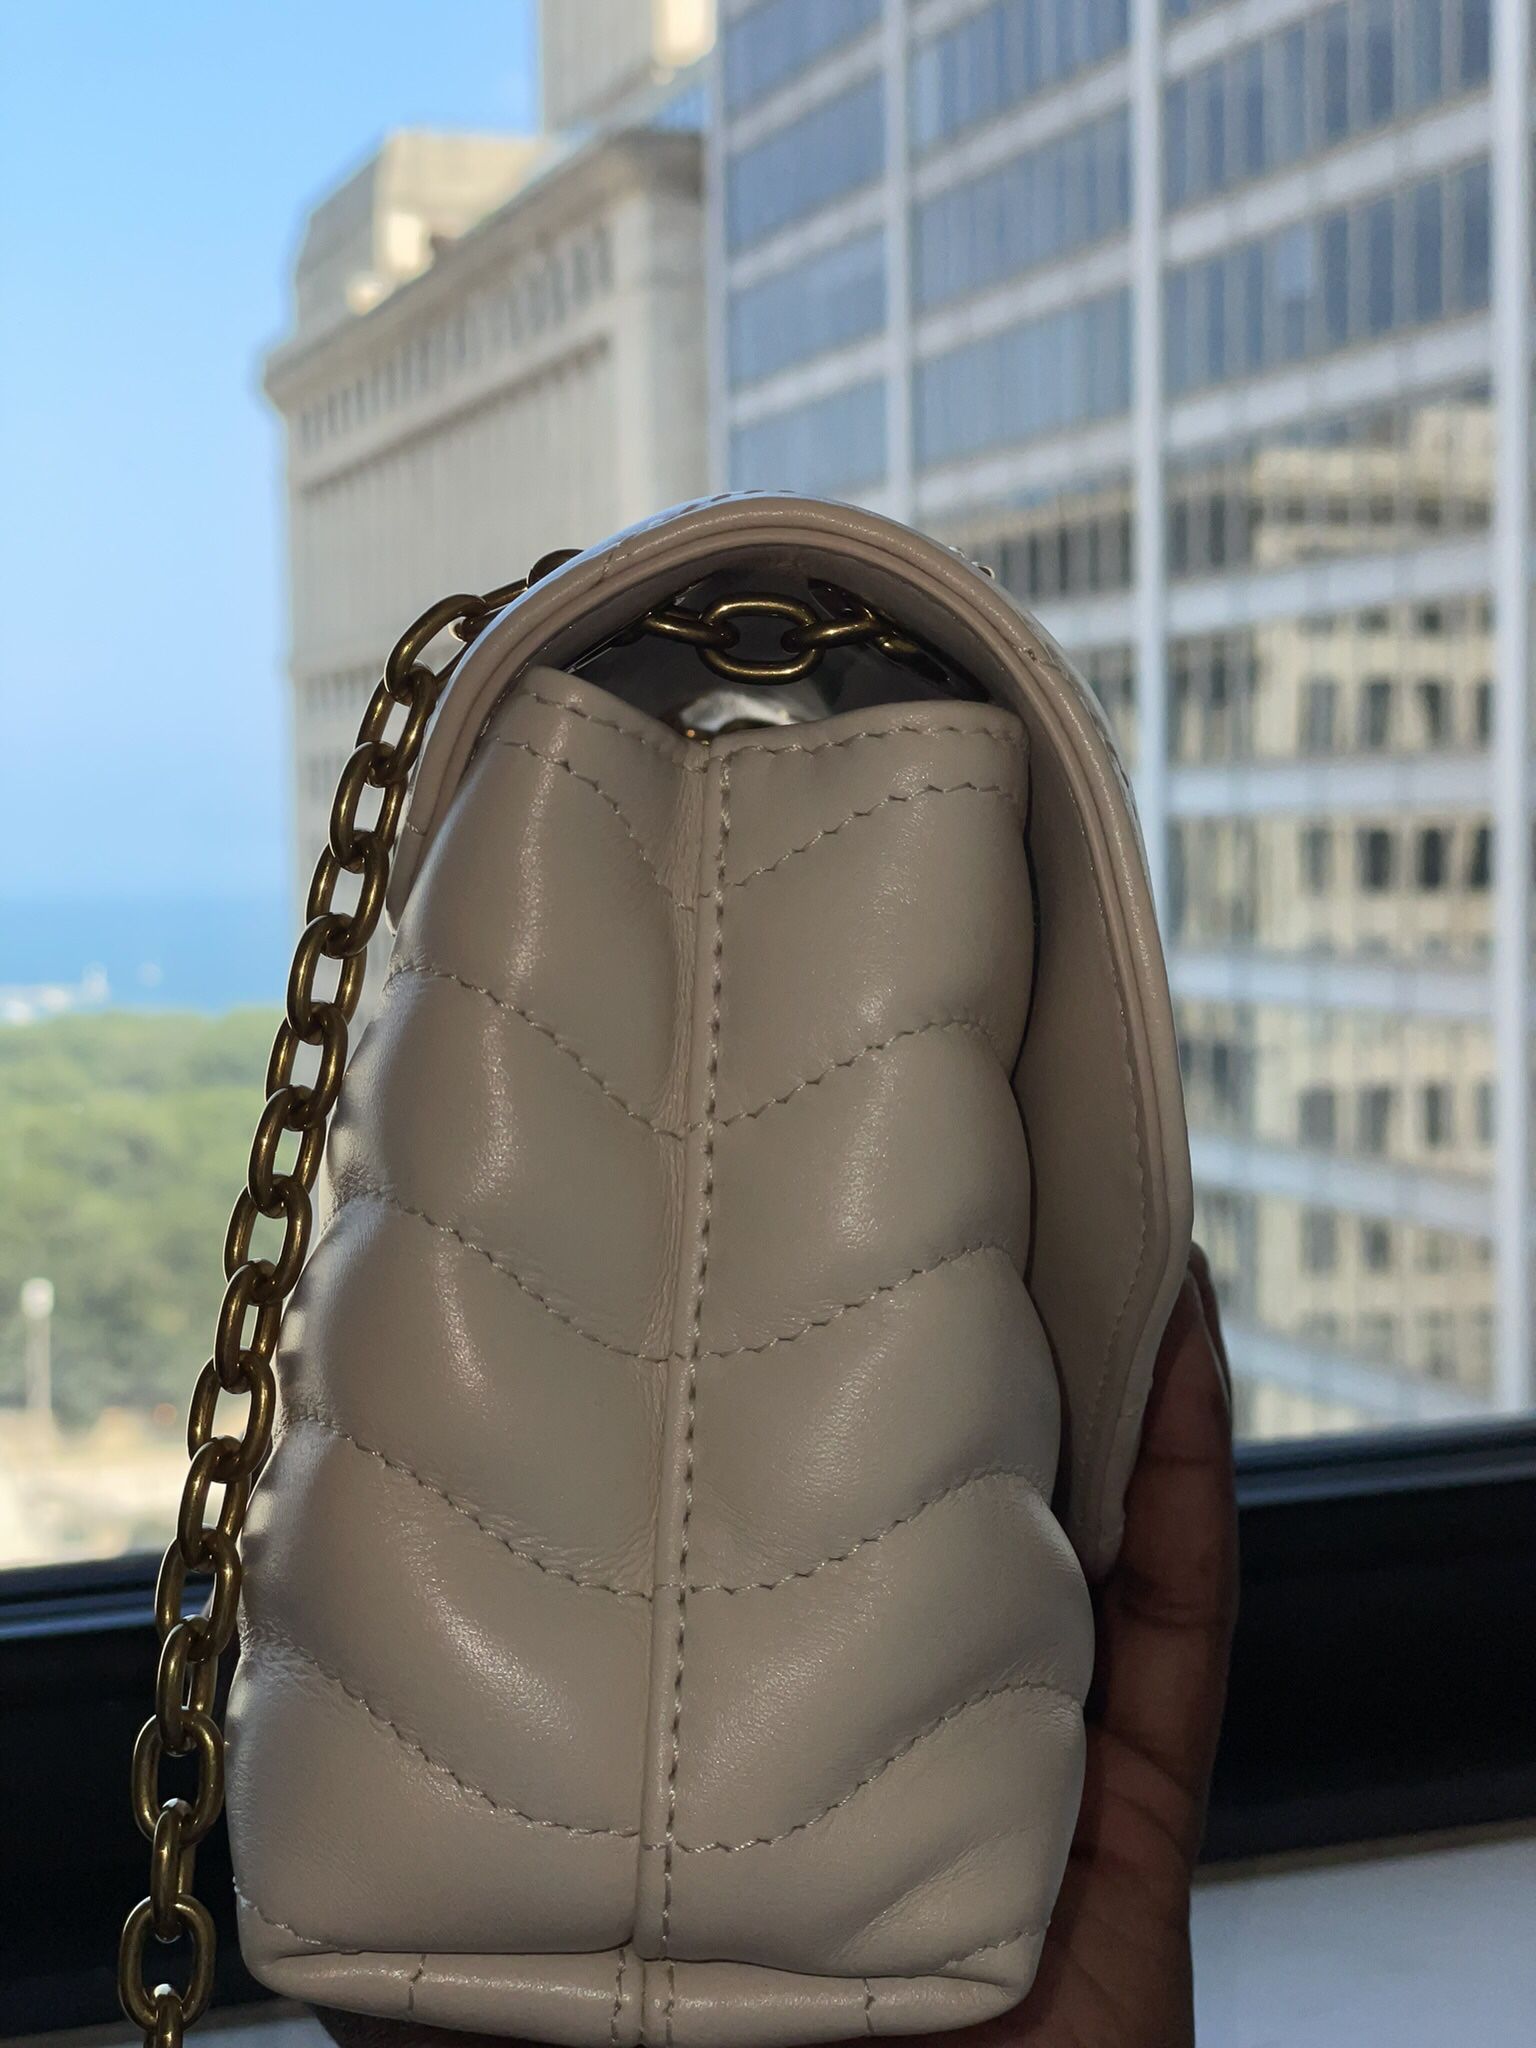 Louis Vuitton New Wave Chain Bag for Sale in Chicago, IL - OfferUp